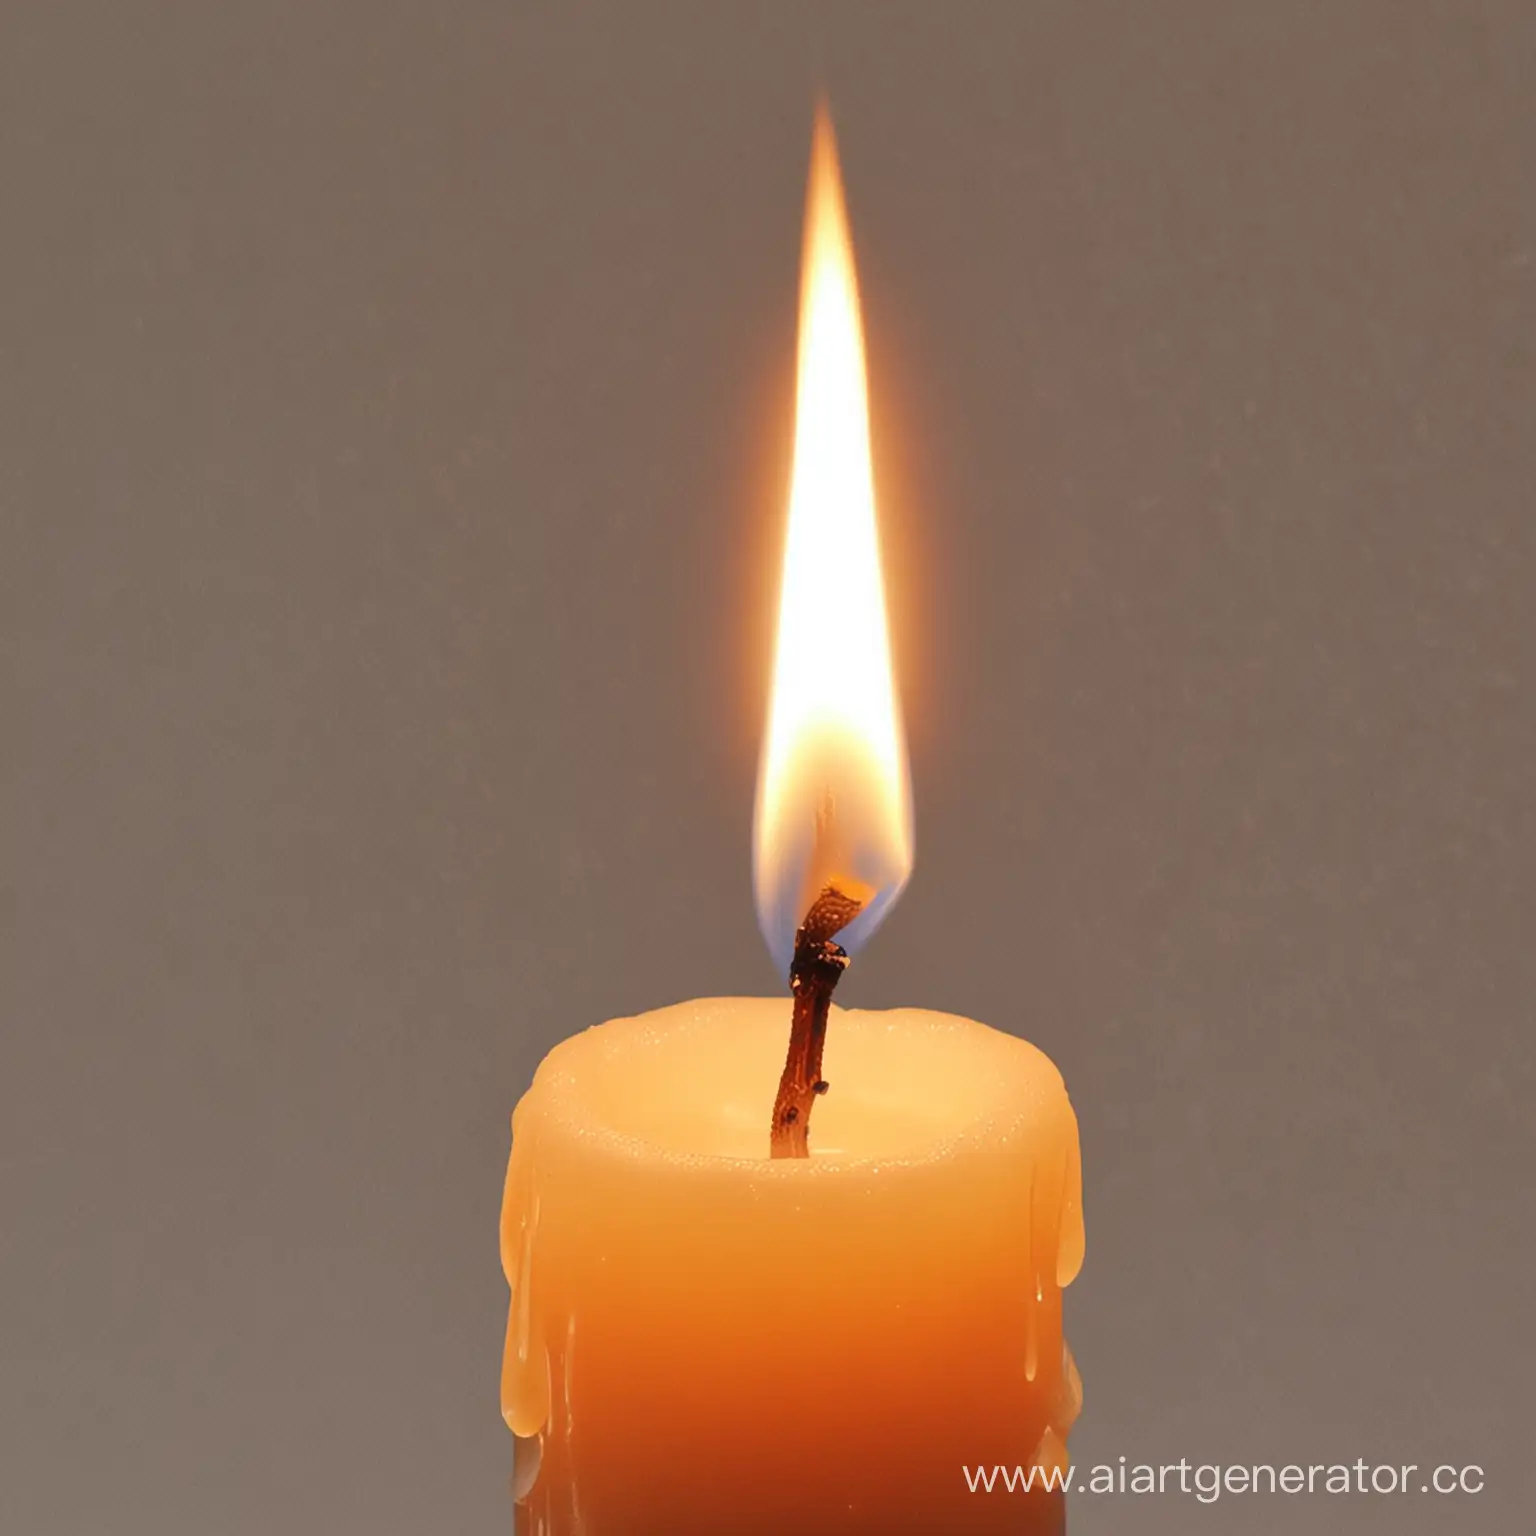 Soft-Glow-of-a-Dancing-Candle-Flame-in-the-Darkness